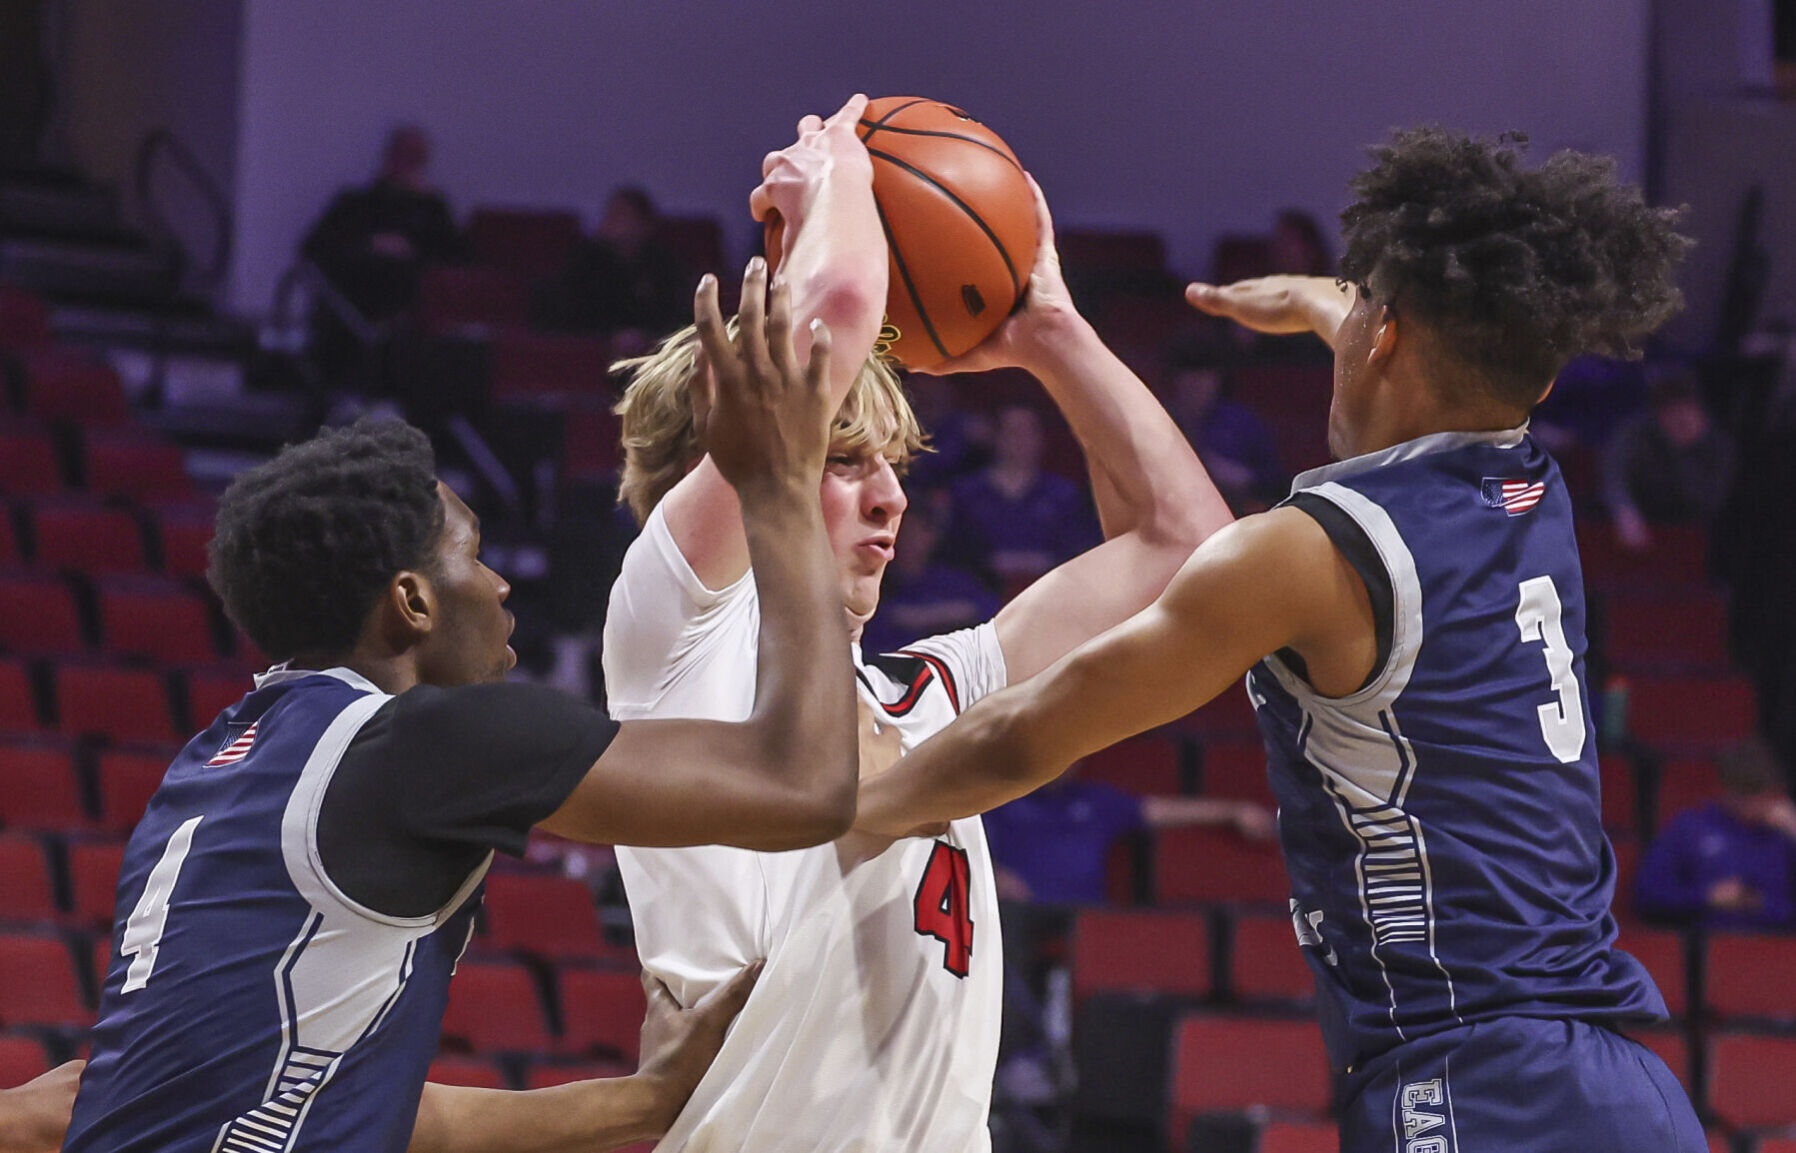 IHSA Boys Basketball State Tournament: Class 1A and 2A Semifinals and Championship Preview